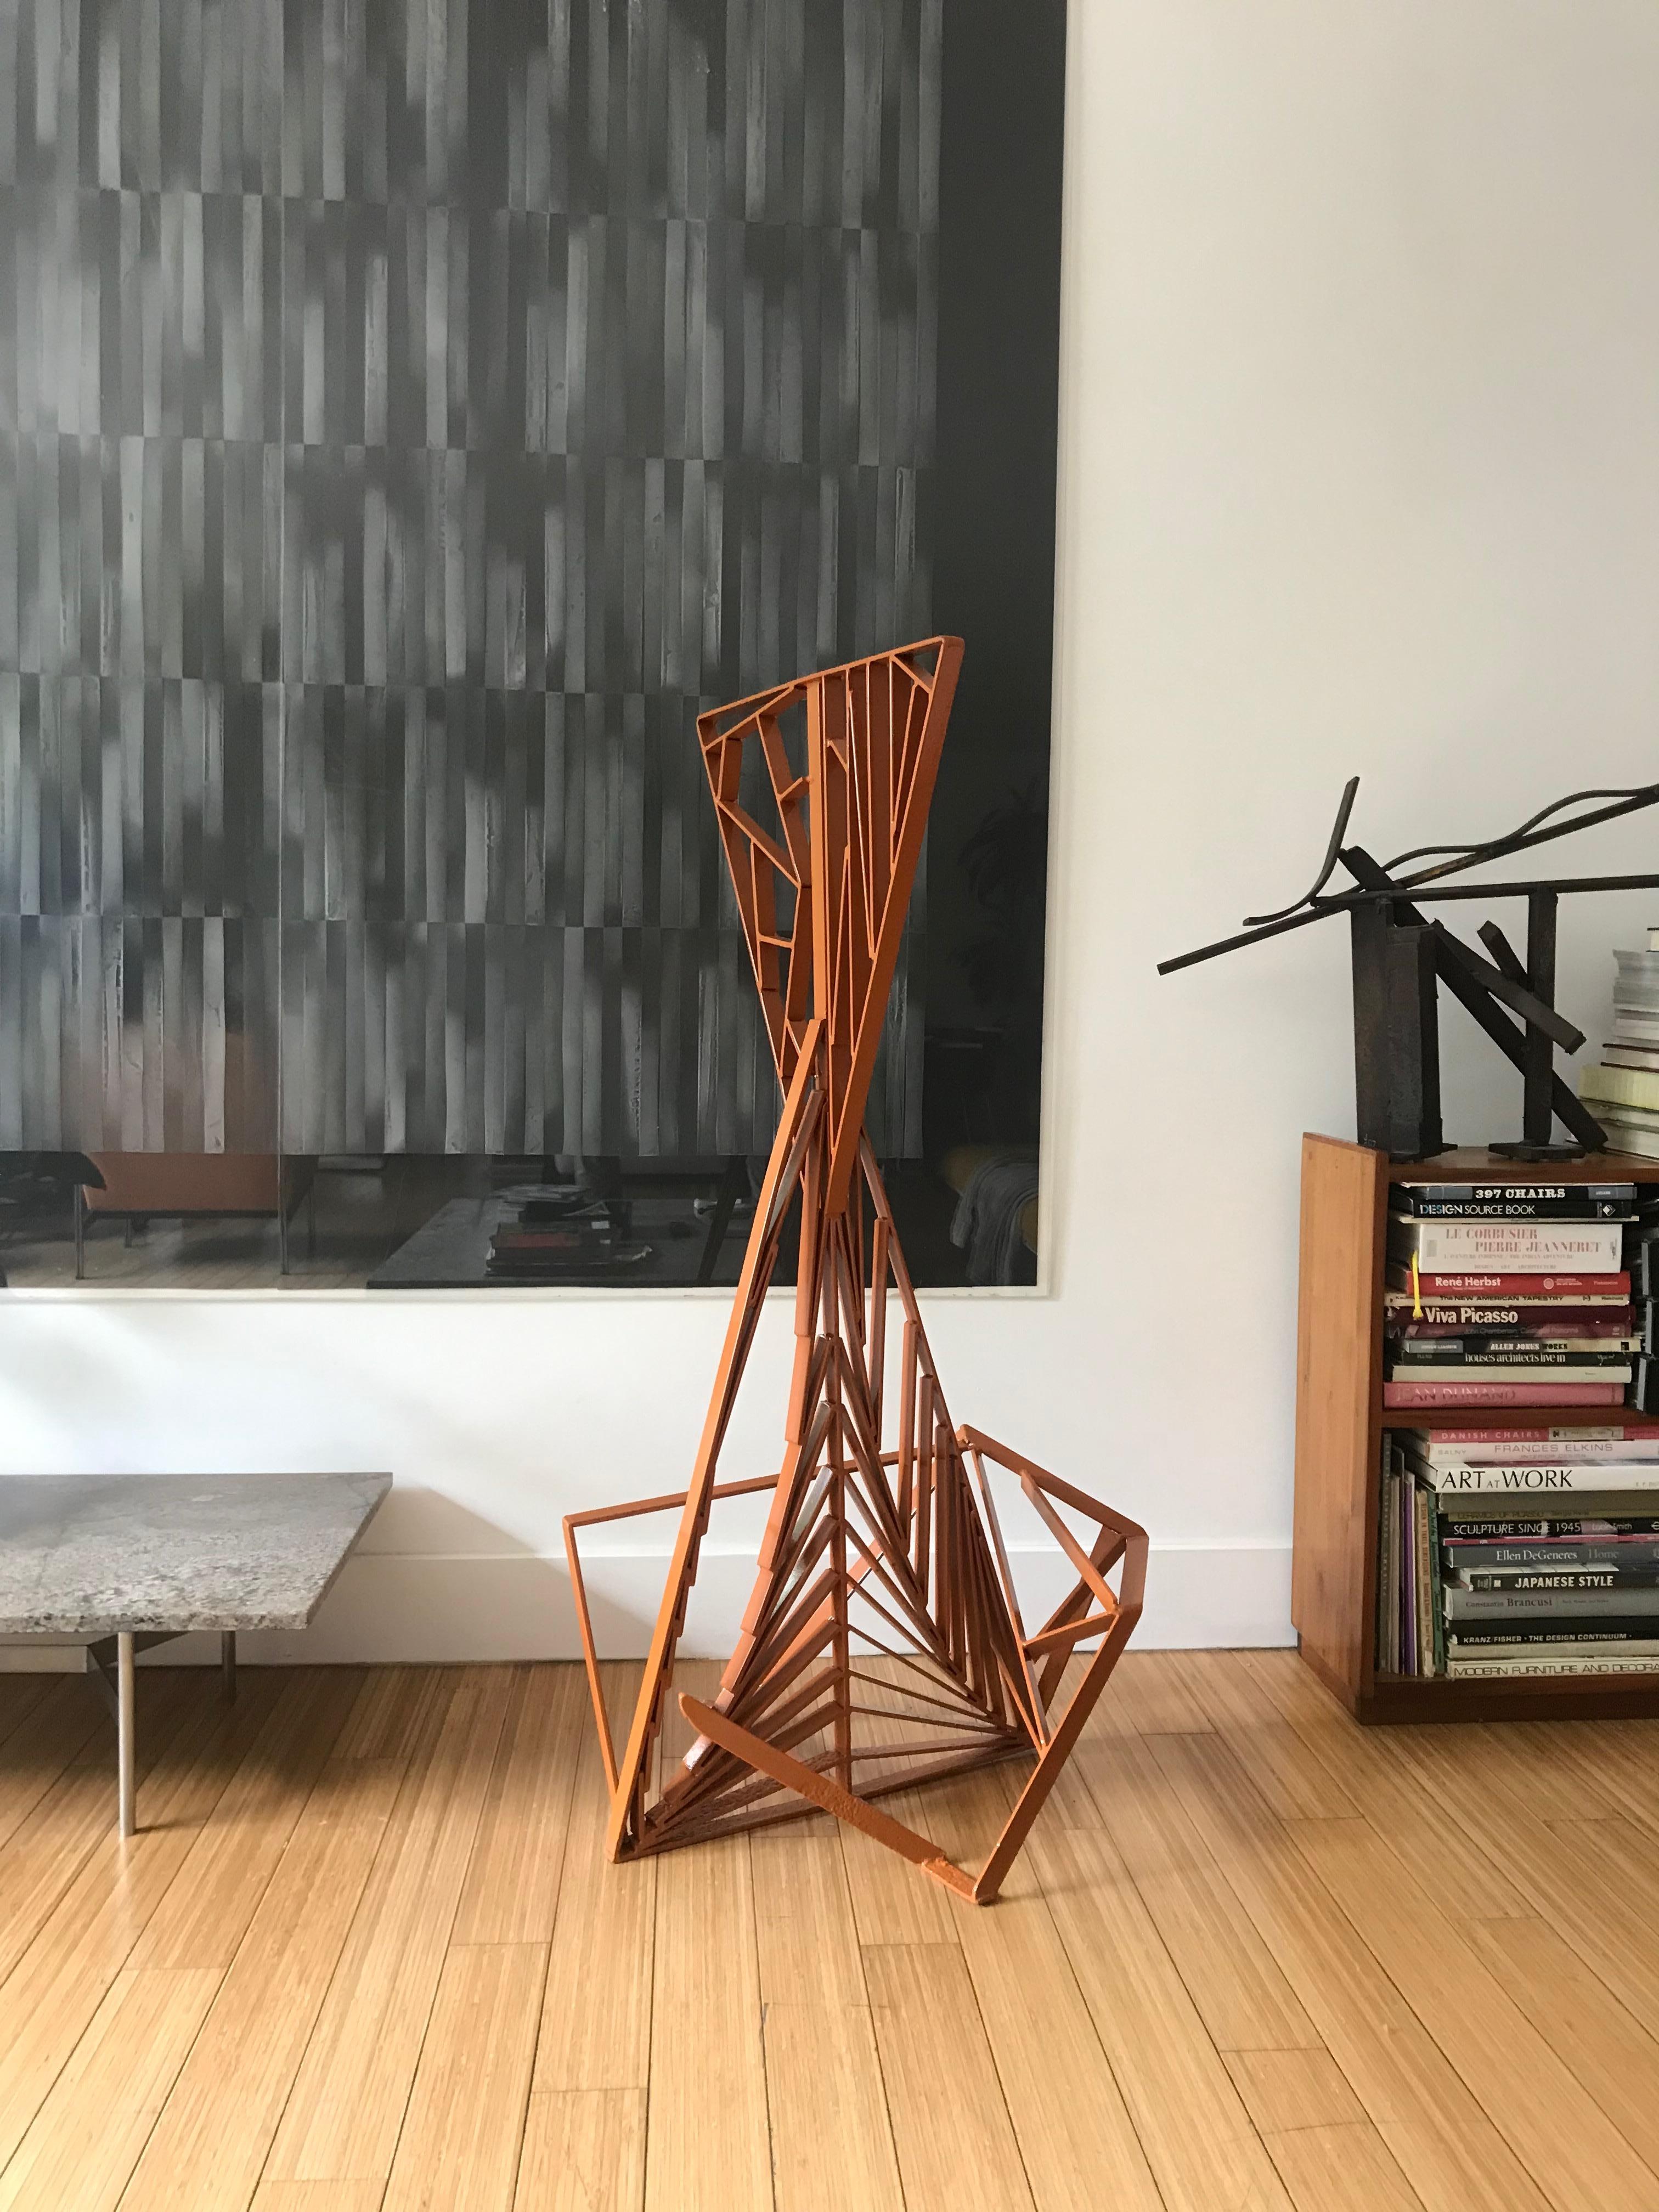 American Large Modern Sculpture For Sale